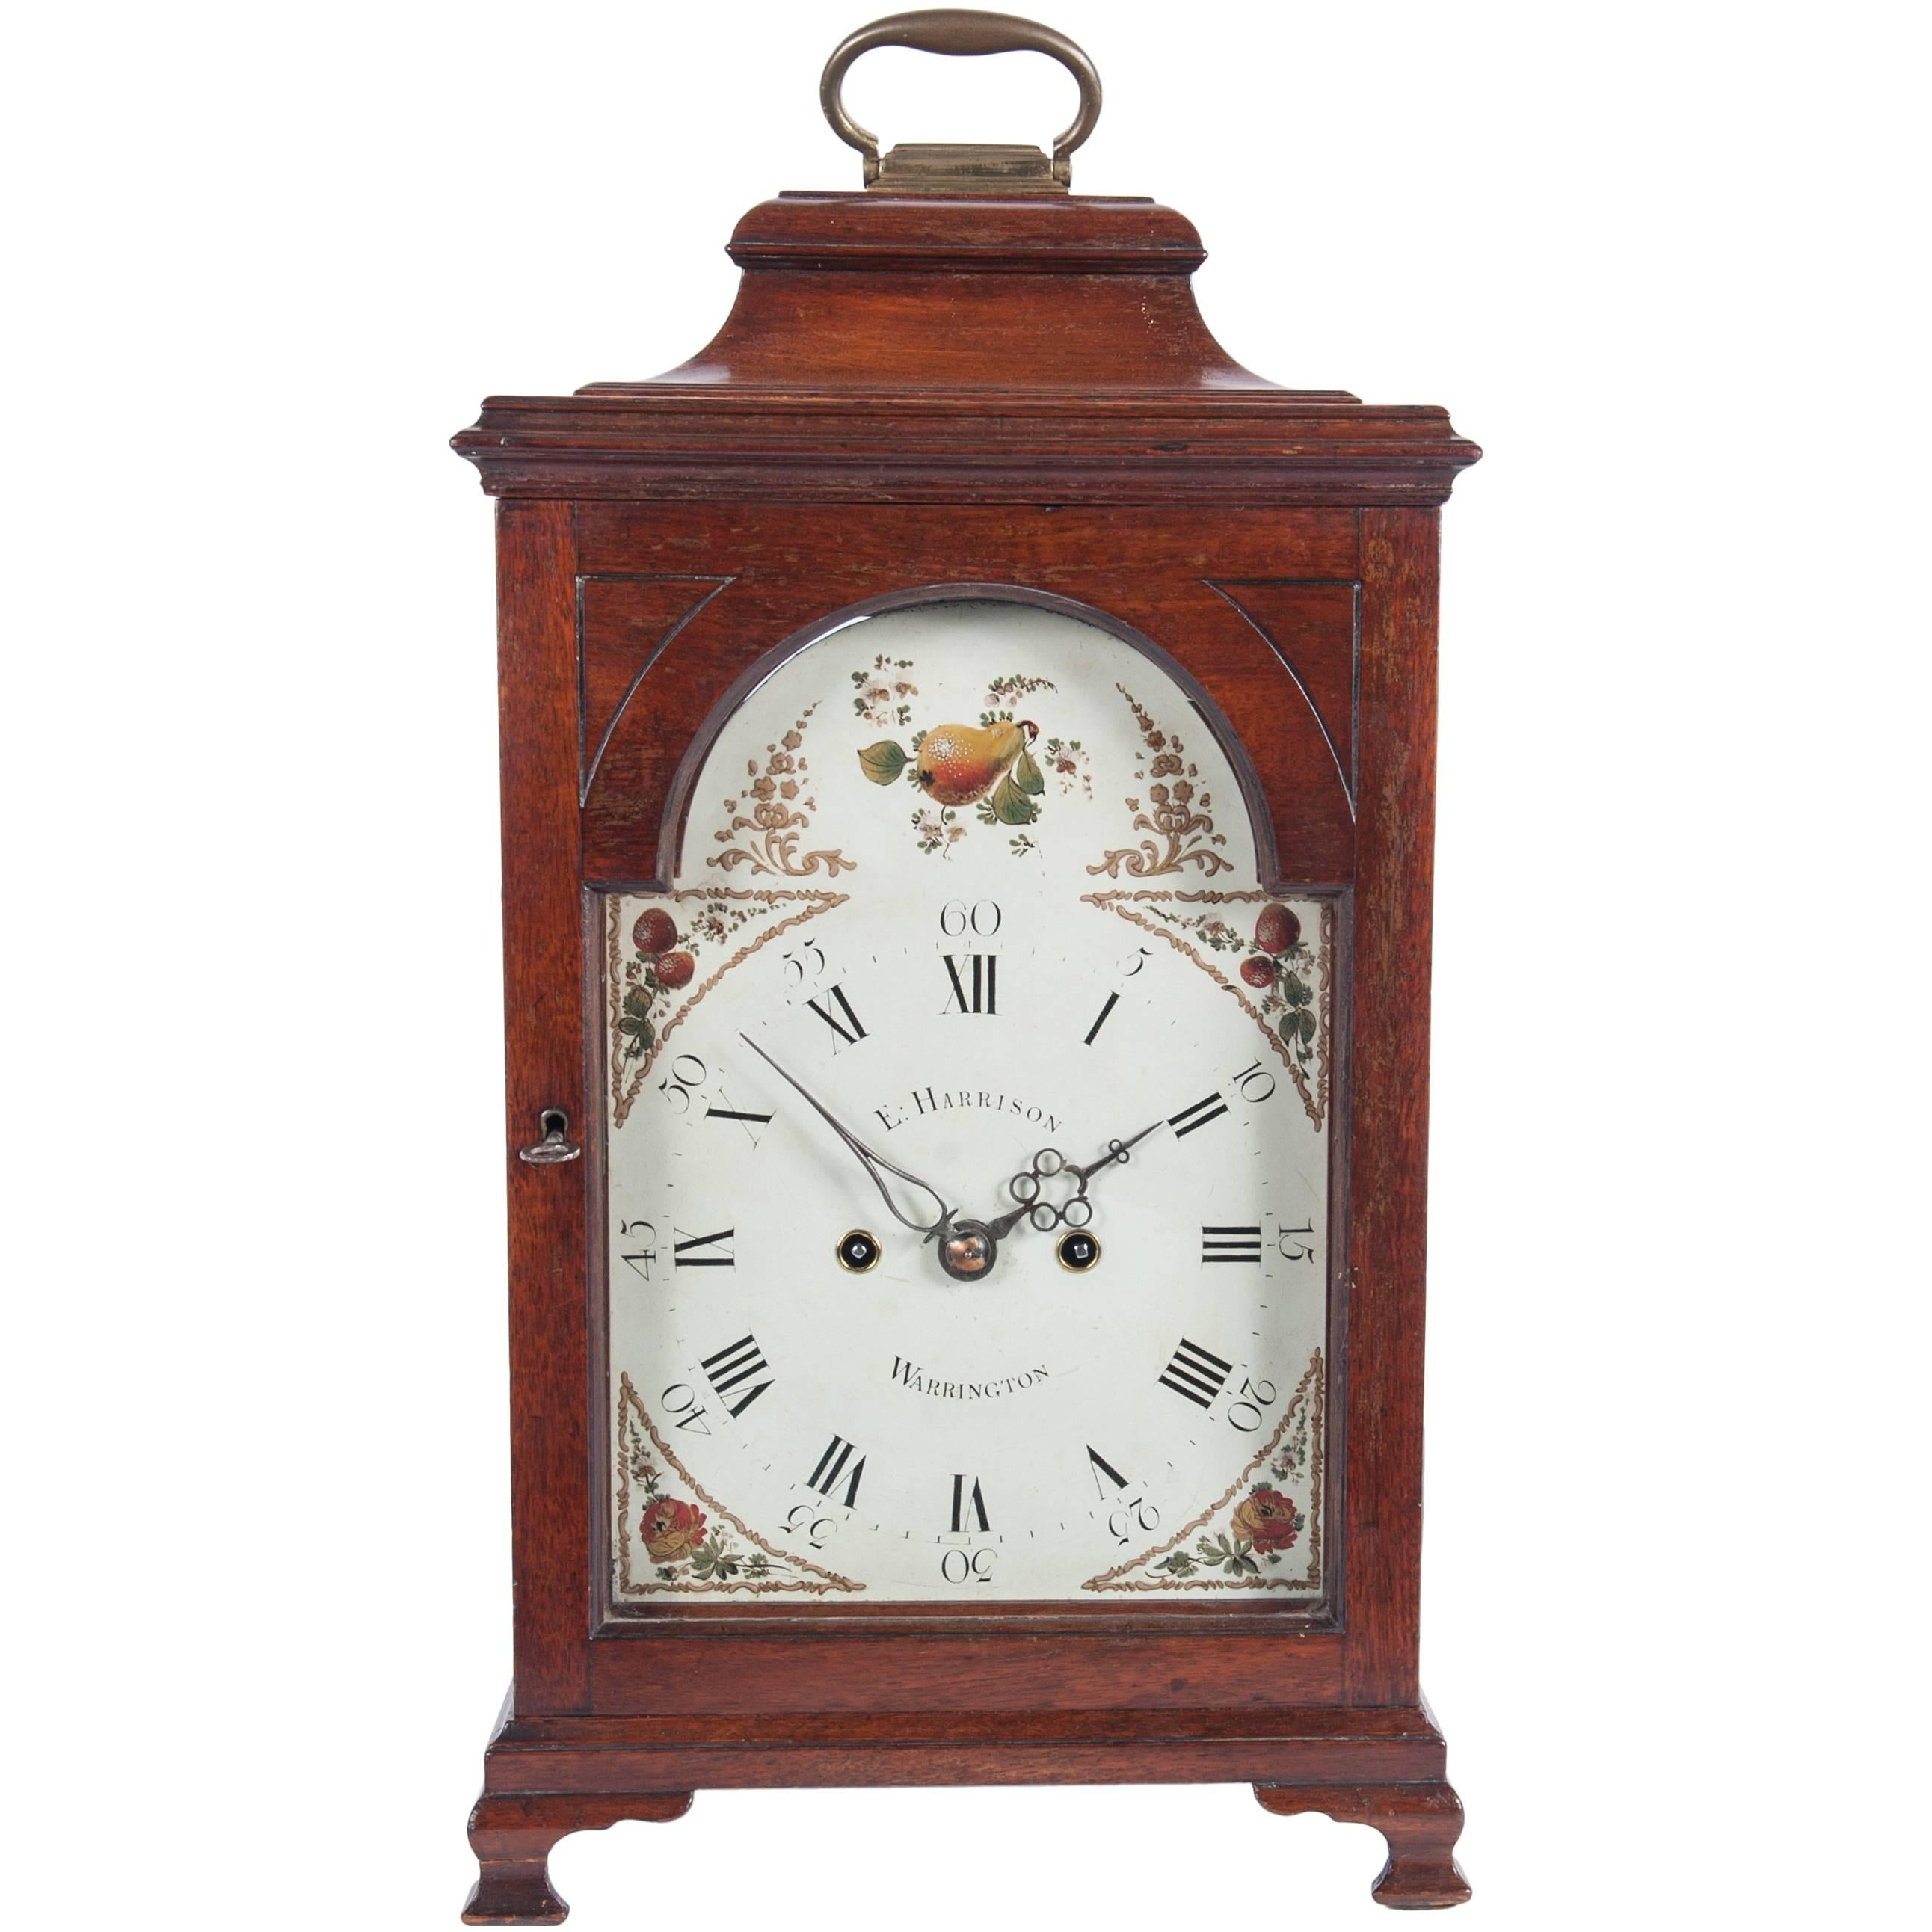 Very Nice and Charming 18th Century Mahogany English Country Bracket Clock For Sale